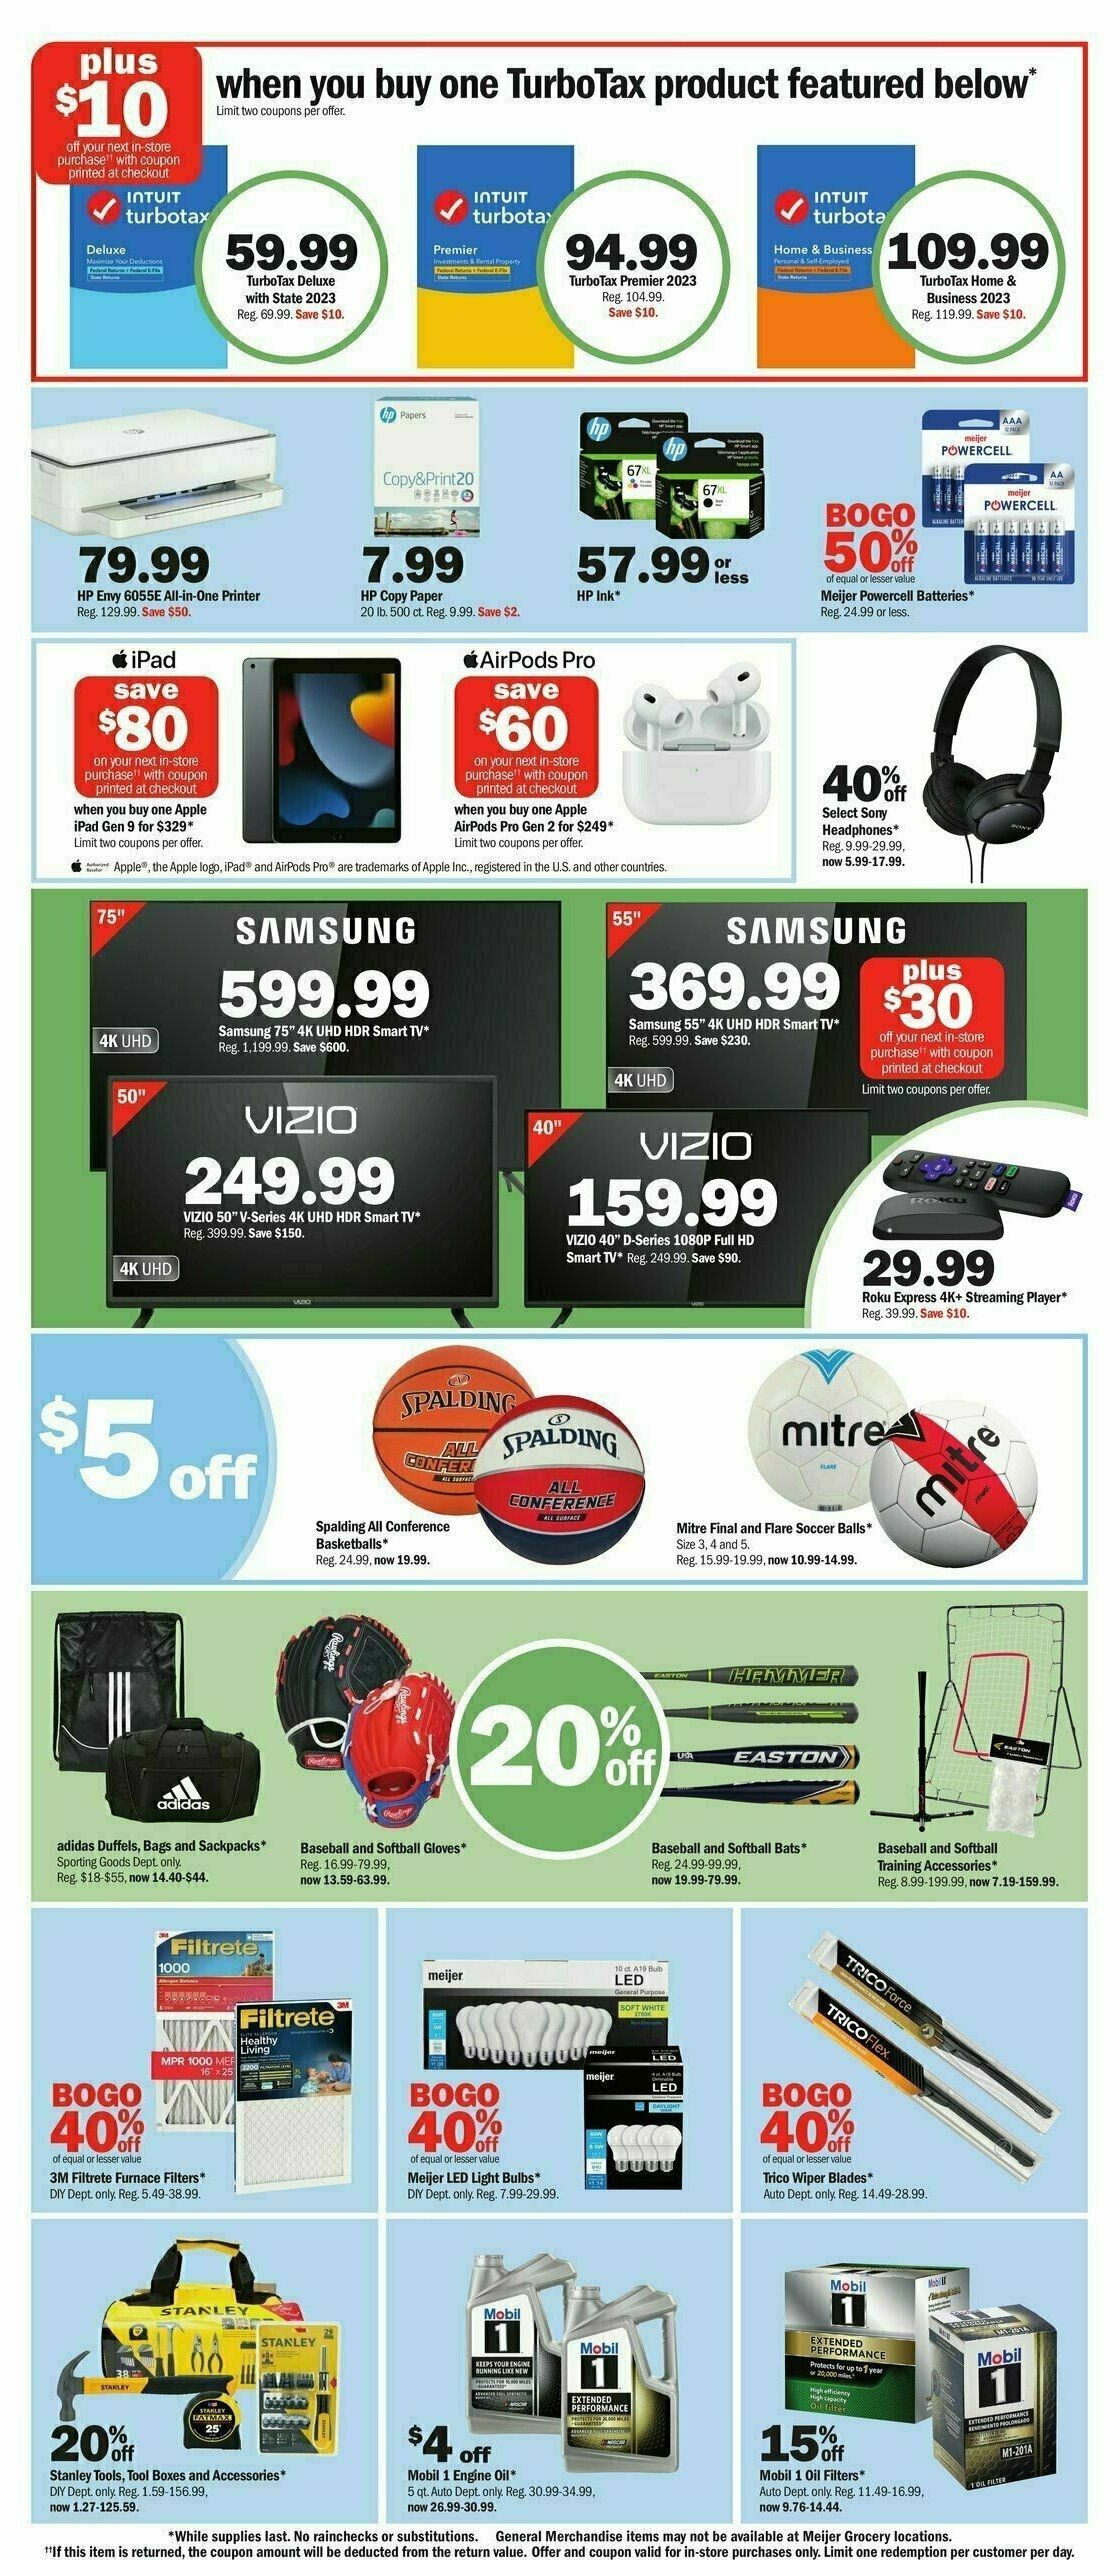 Meijer Weekly Ad from March 10